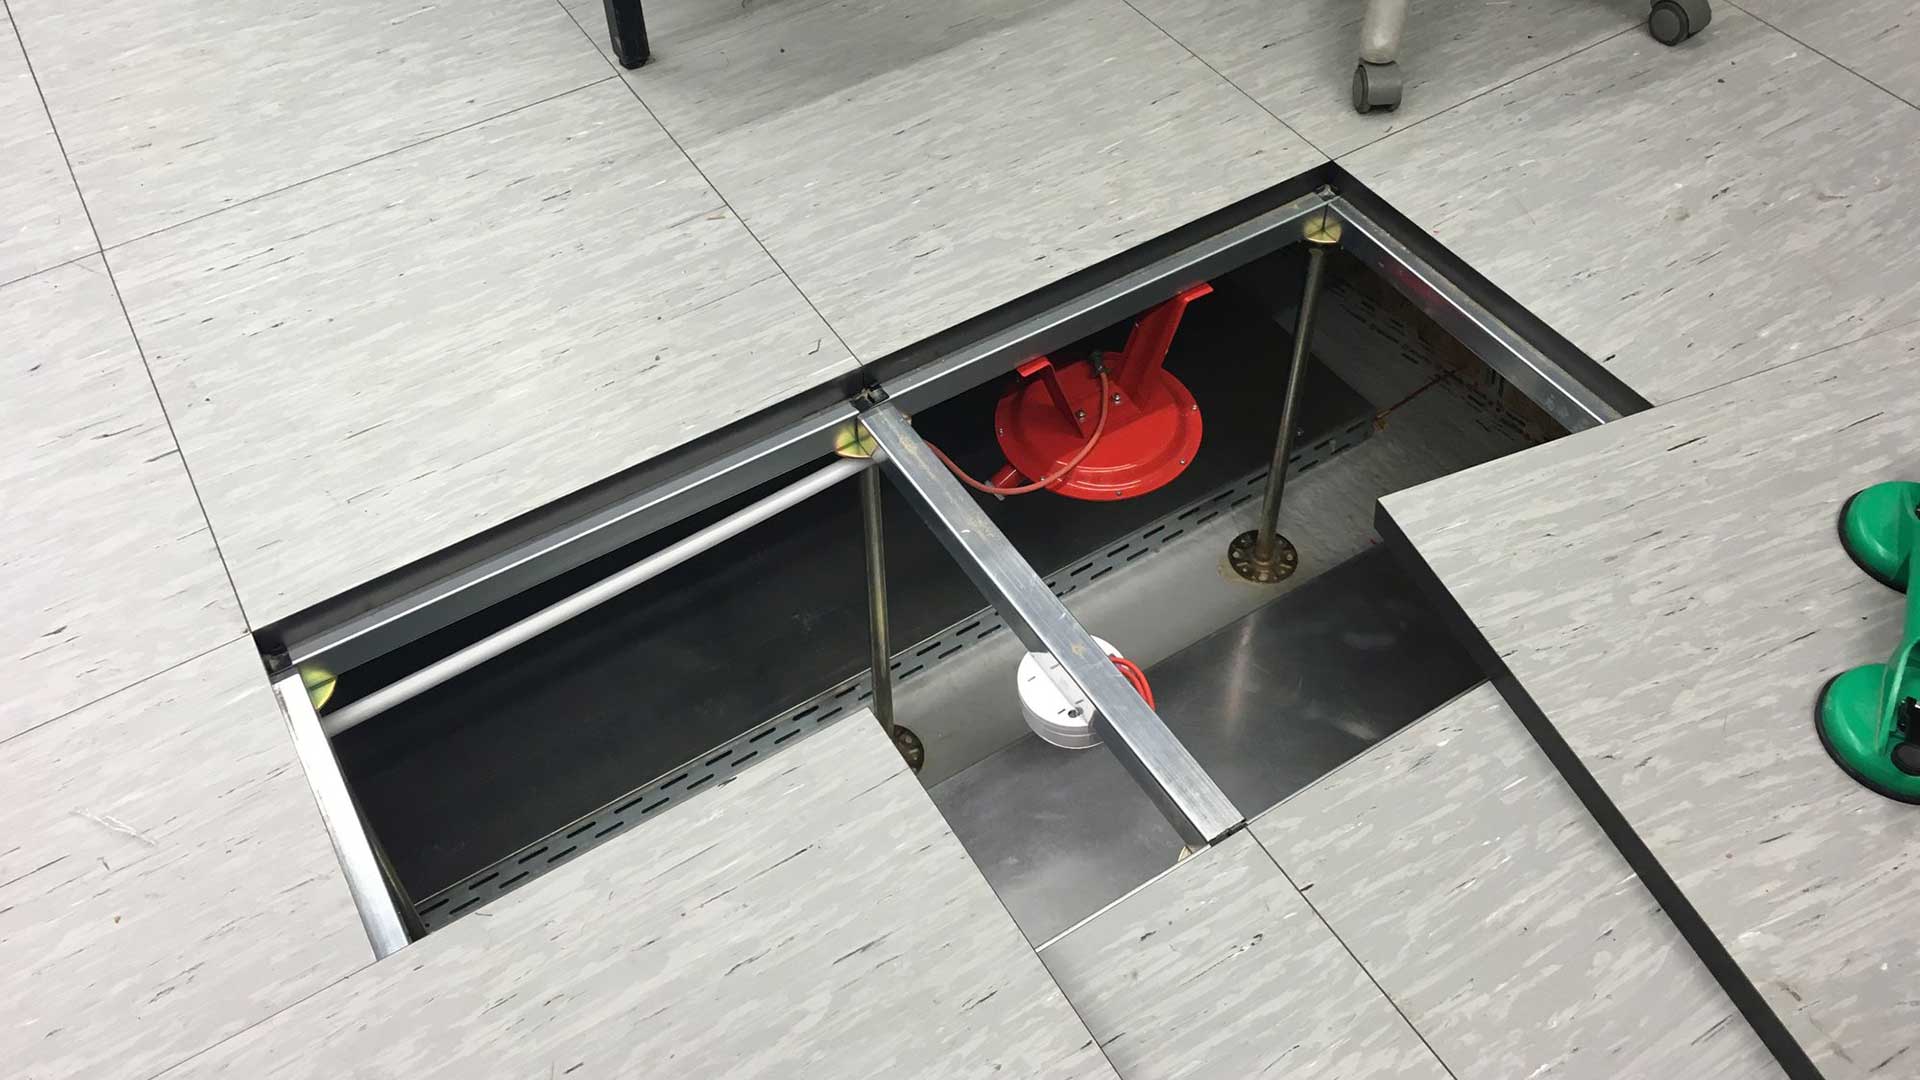 New extinguishing system for raised floors and cable trays